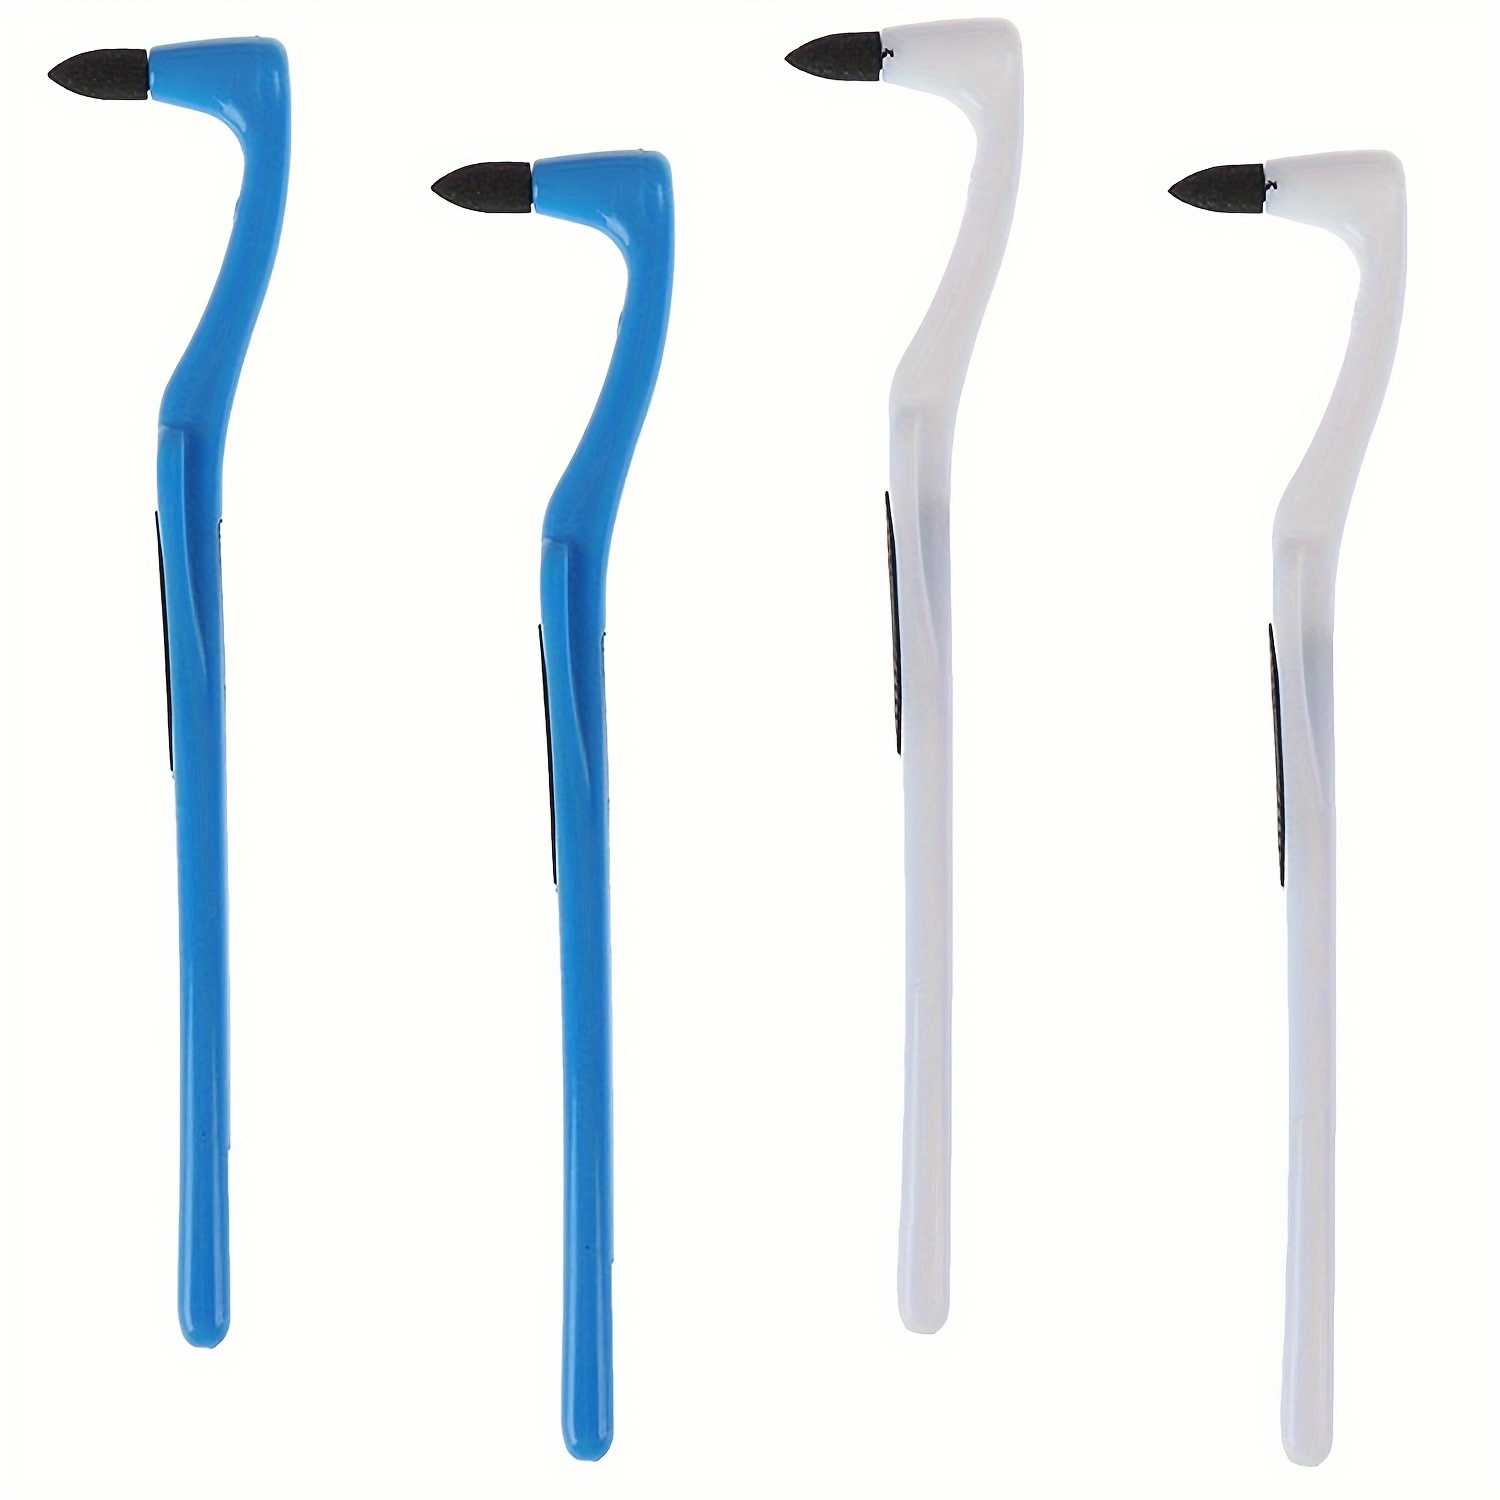 

4-piece Ergonomic Tooth Stain Removers - Durable, Odorless Dental Tools For Adults | Effective Plaque & Tartar Cleaning